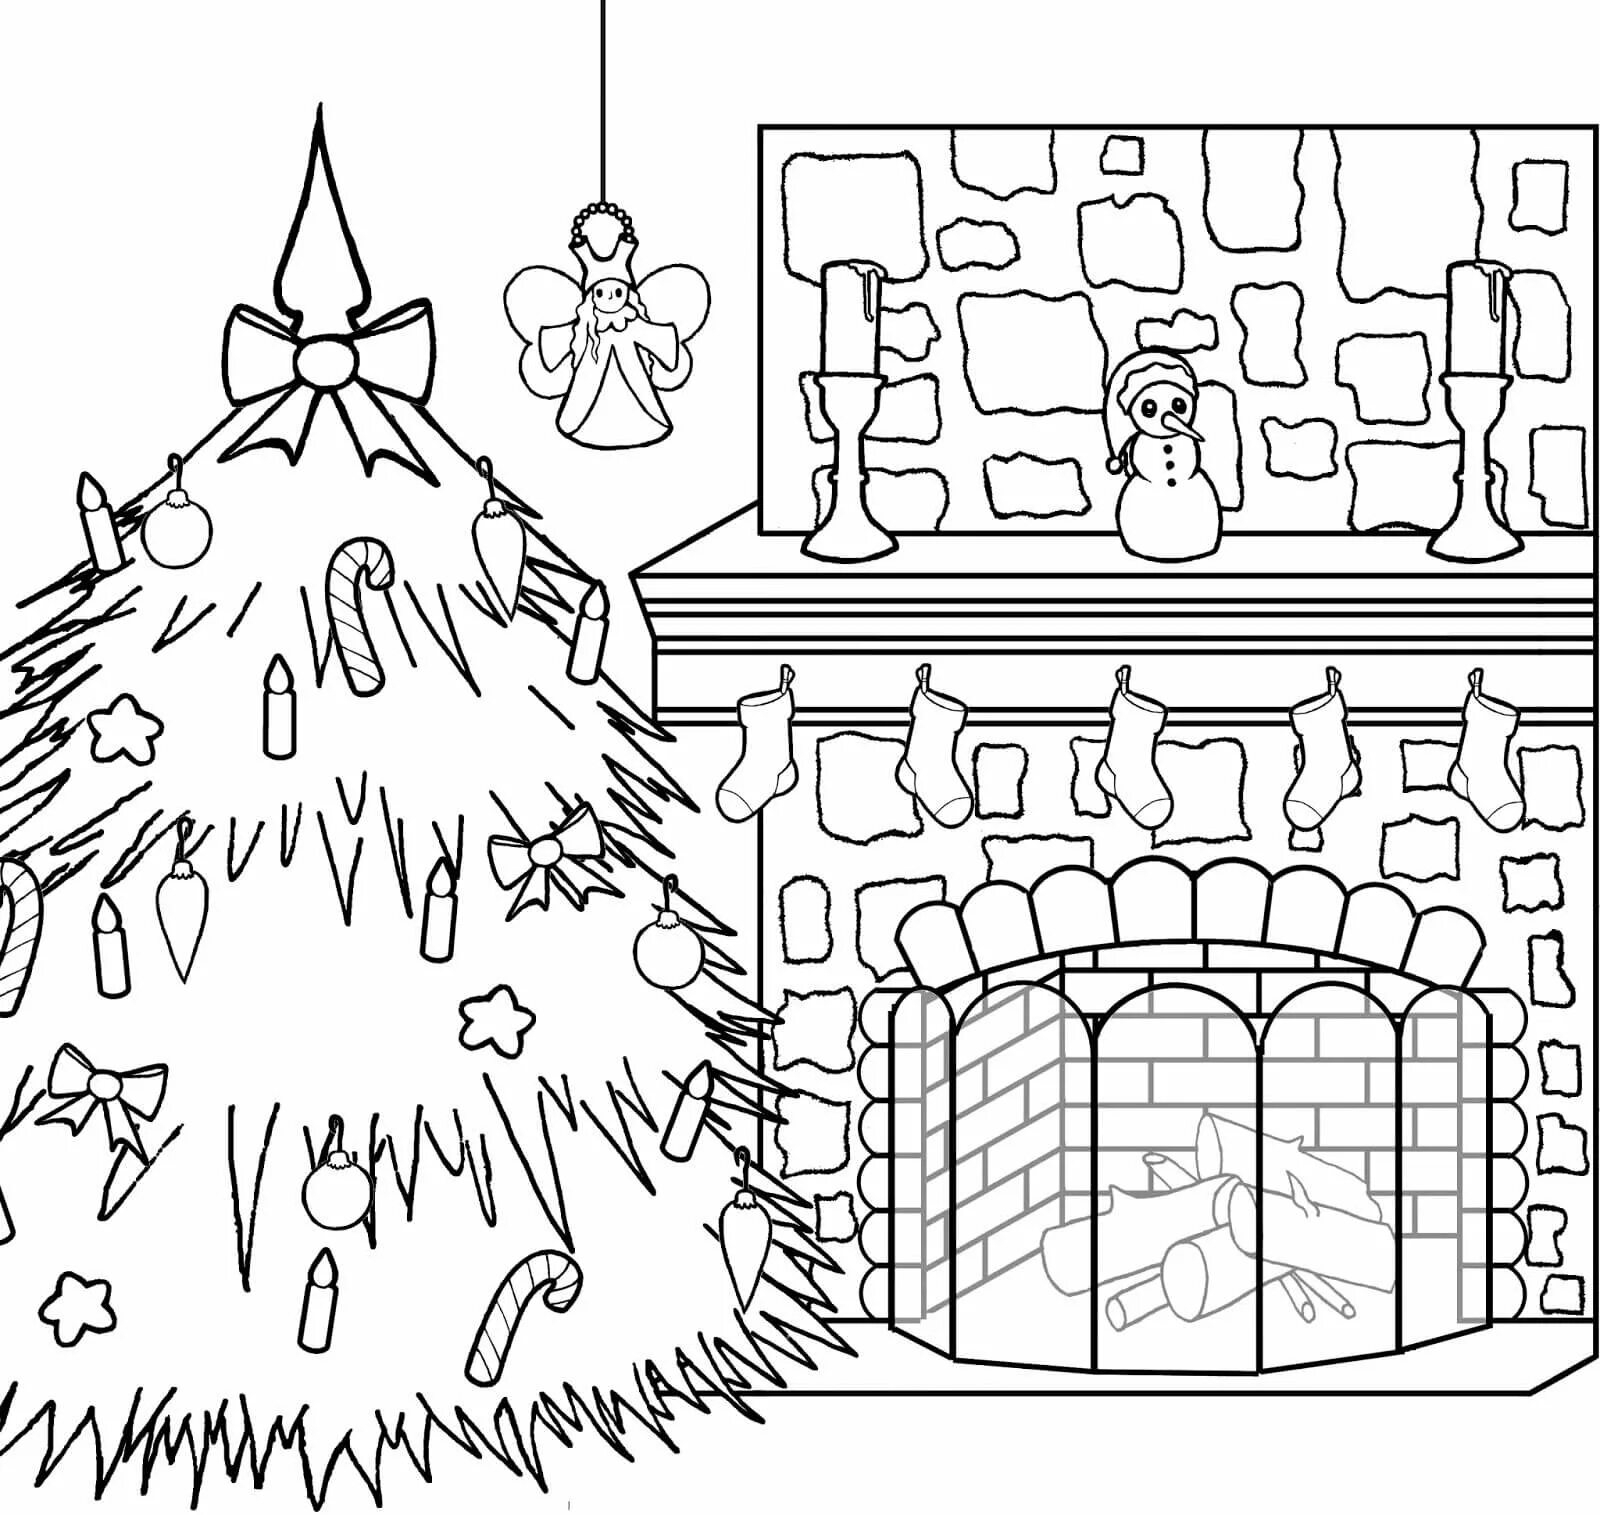 Coloring the Kremlin Christmas tree with an ornament